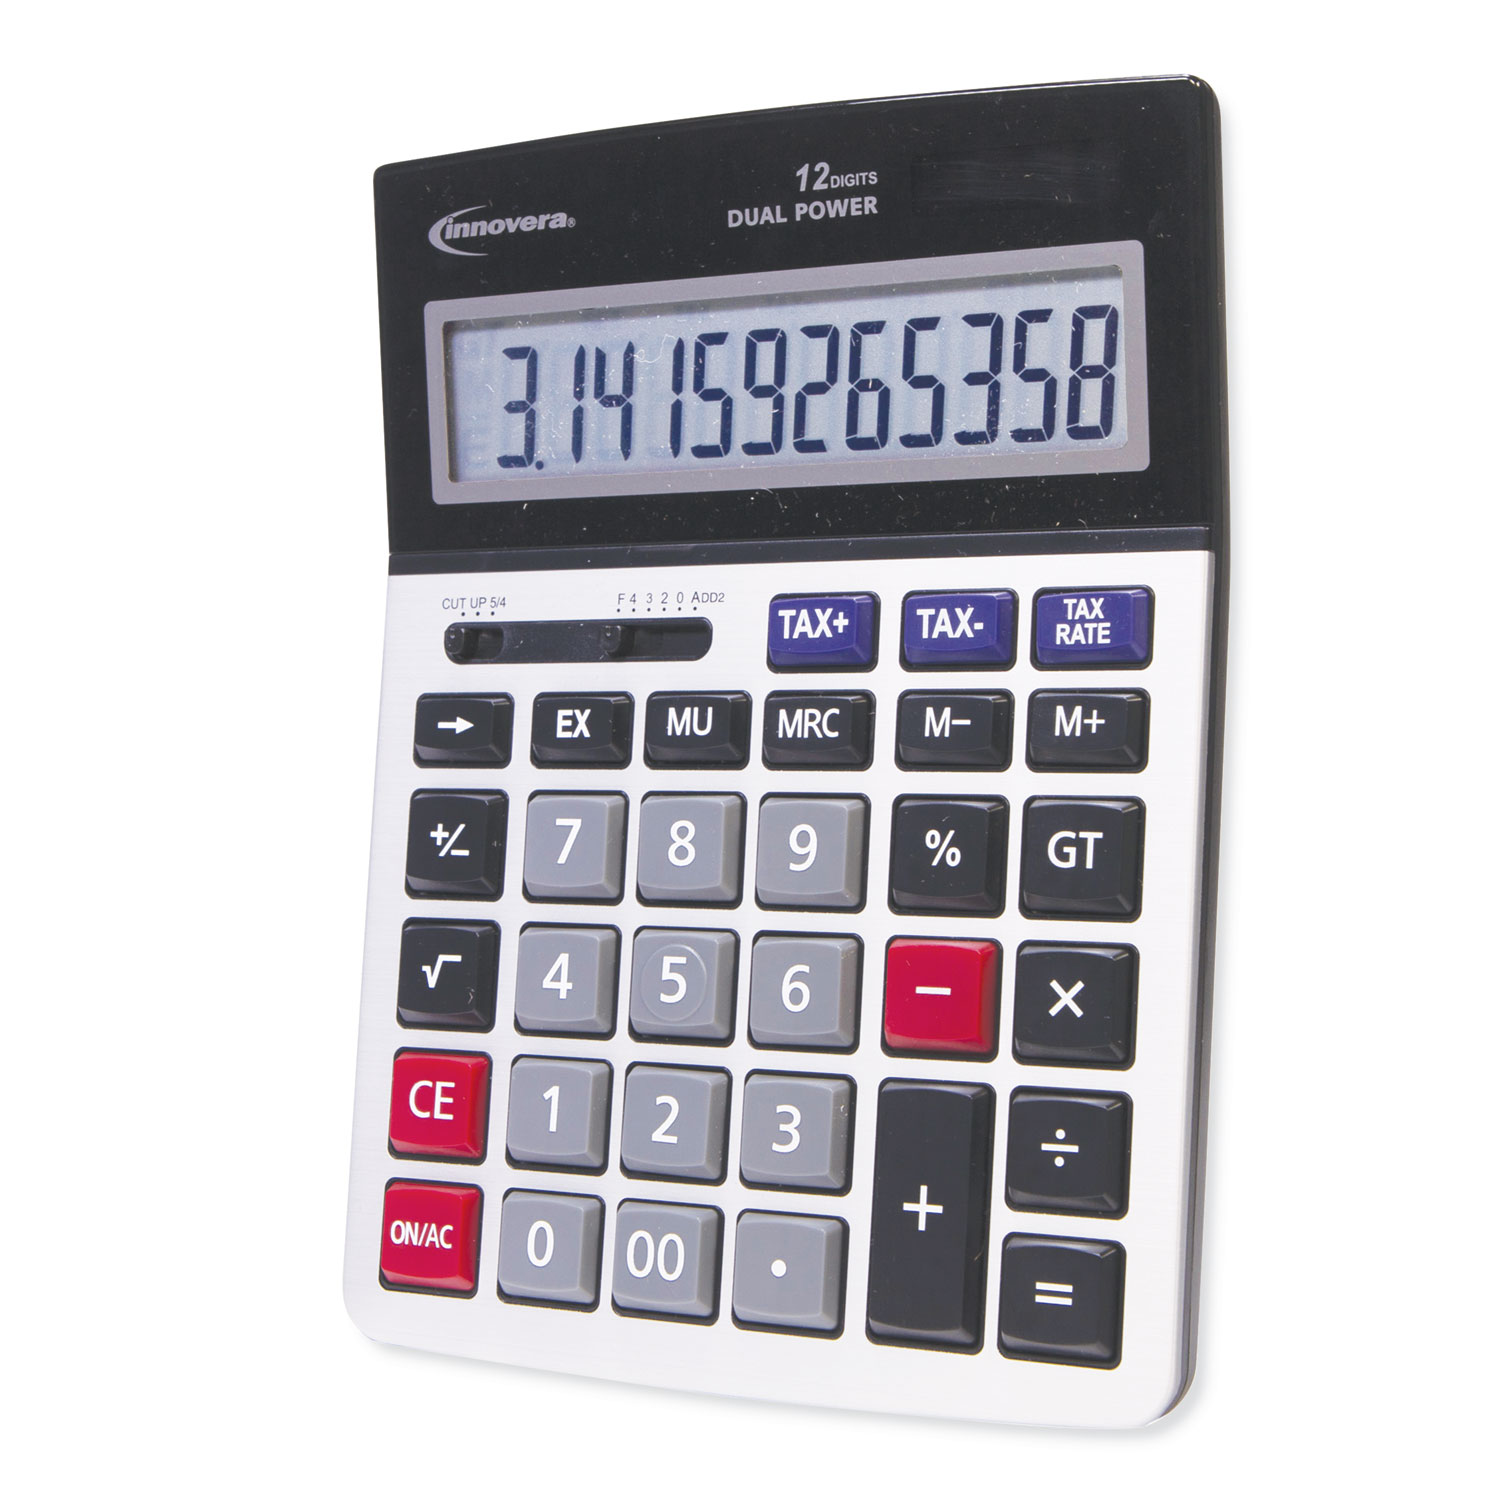 Pocket Small Size Desk Calculator, 12 Digit Large LCD Display, Basic Tax  Function Handheld Desktop Calculator with Solar Battery Dual Power, Perfect